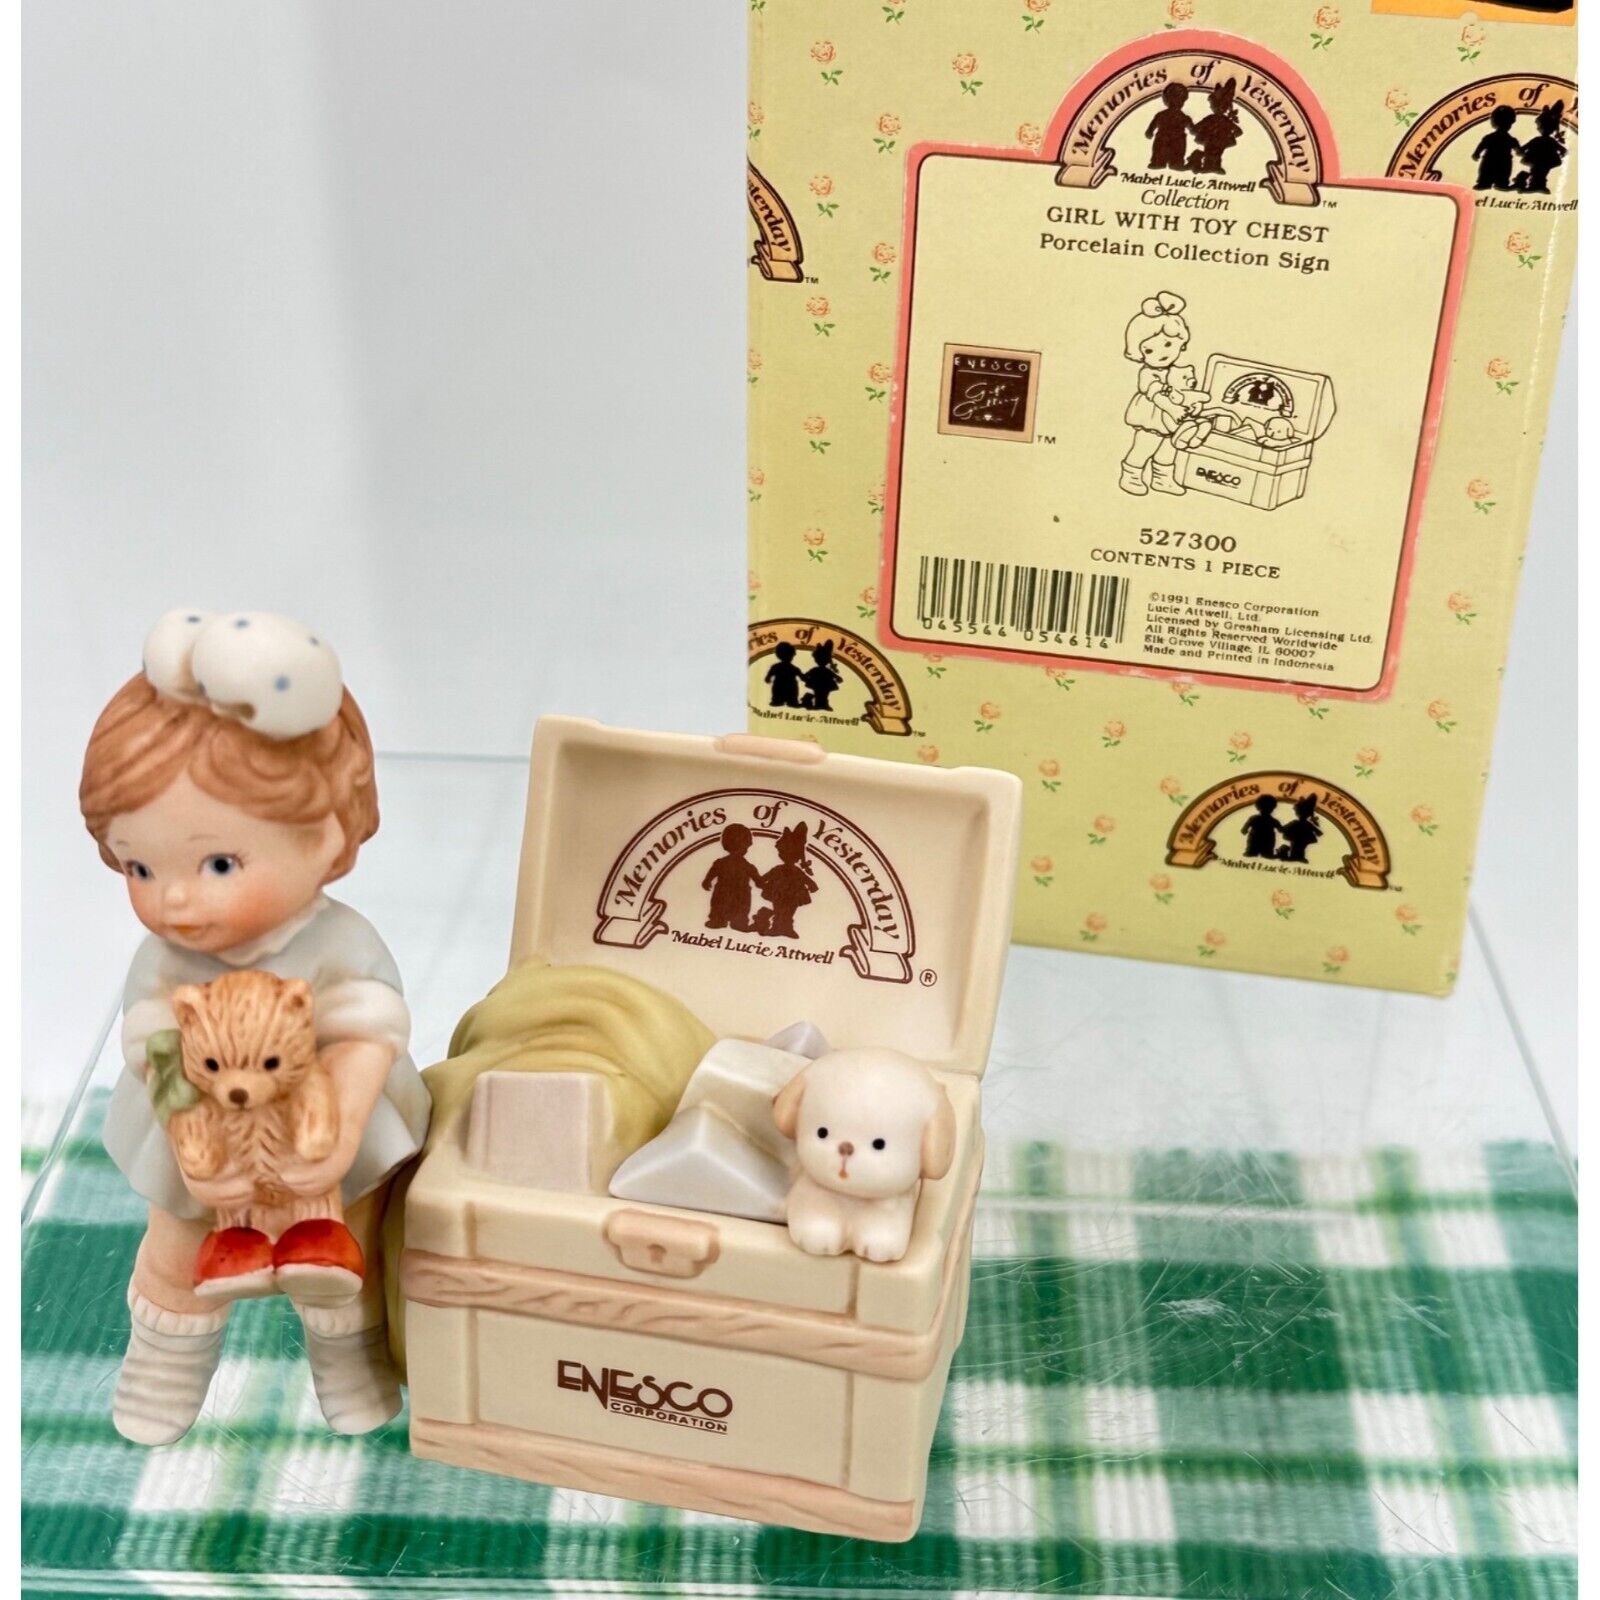 Enesco Memories of Yesterday Porcelain Figurine - Girl with Toy Chest 1991 NIB